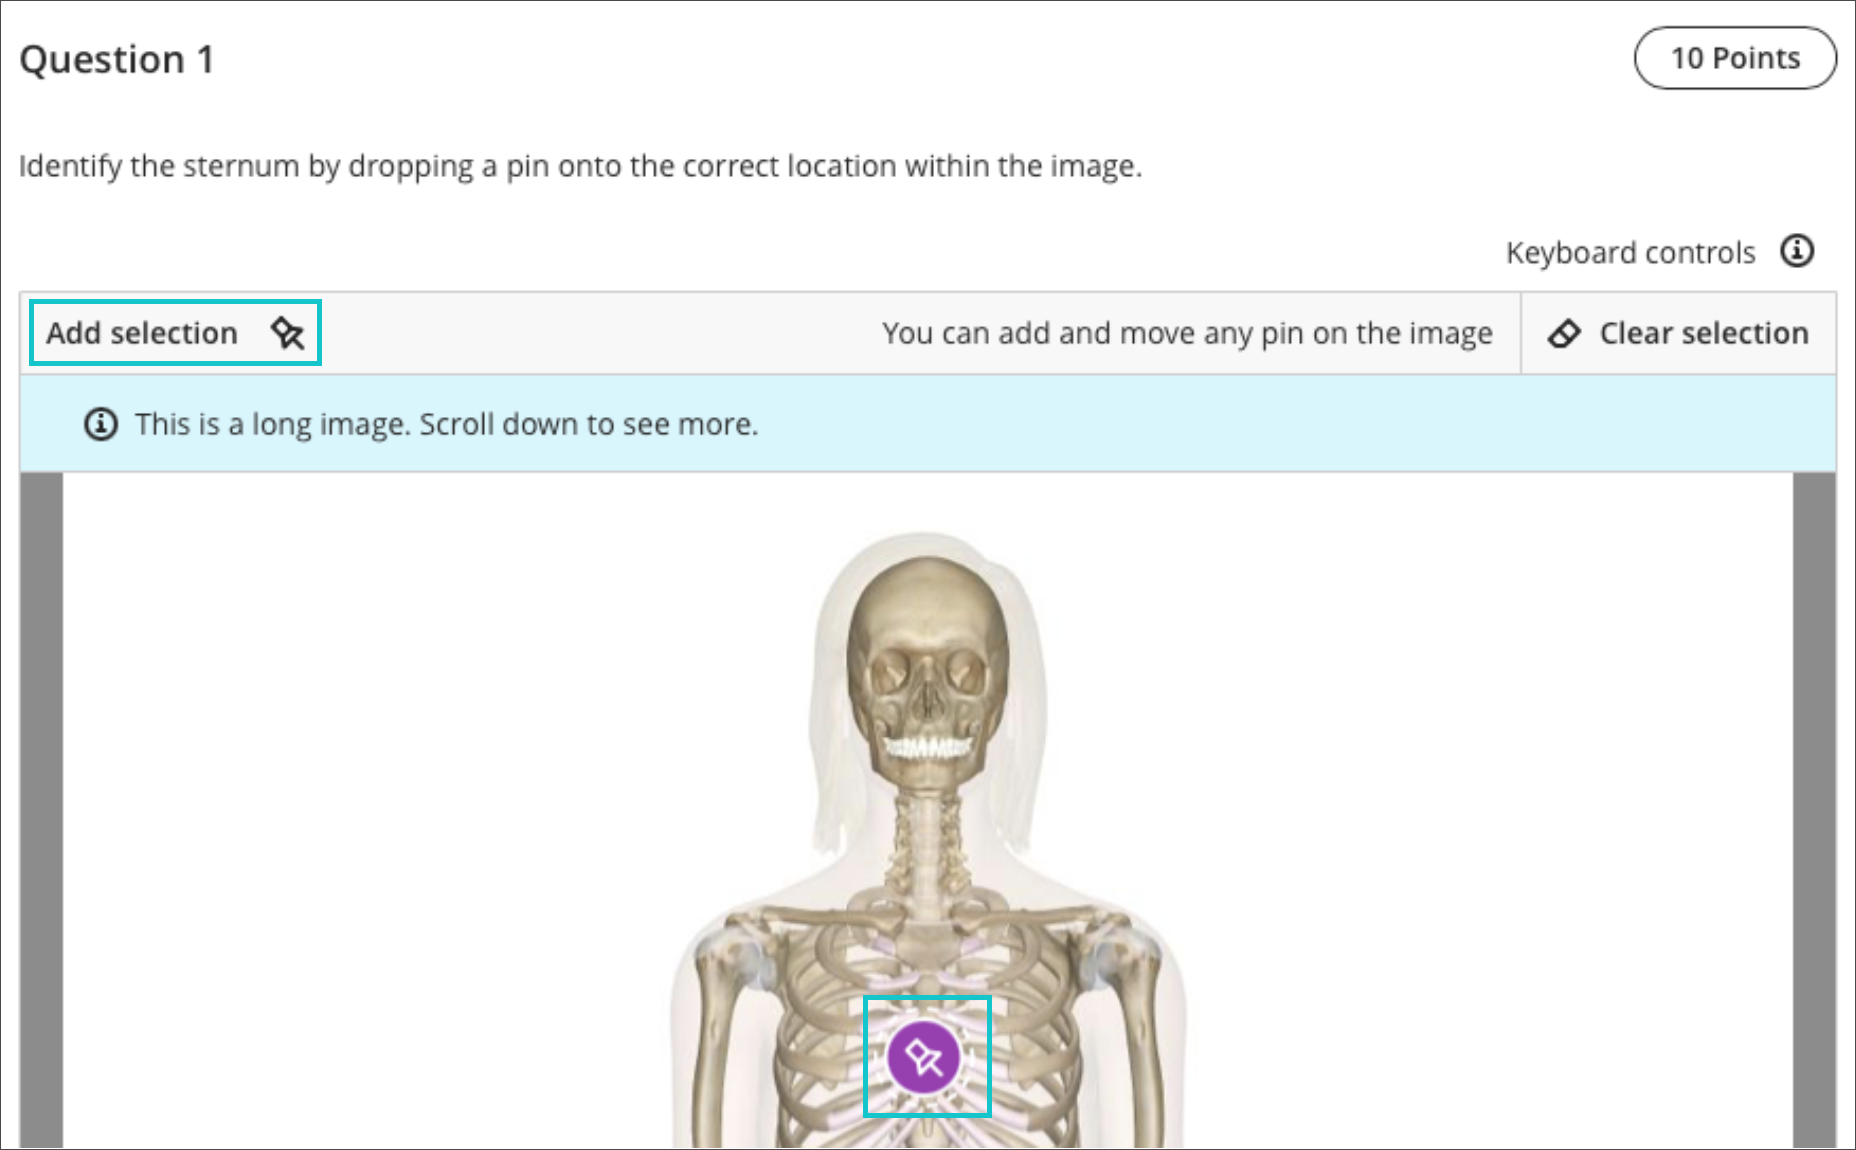 screenshot of hotspot question asking students to place a pin on the sternum in an image of a skeleton